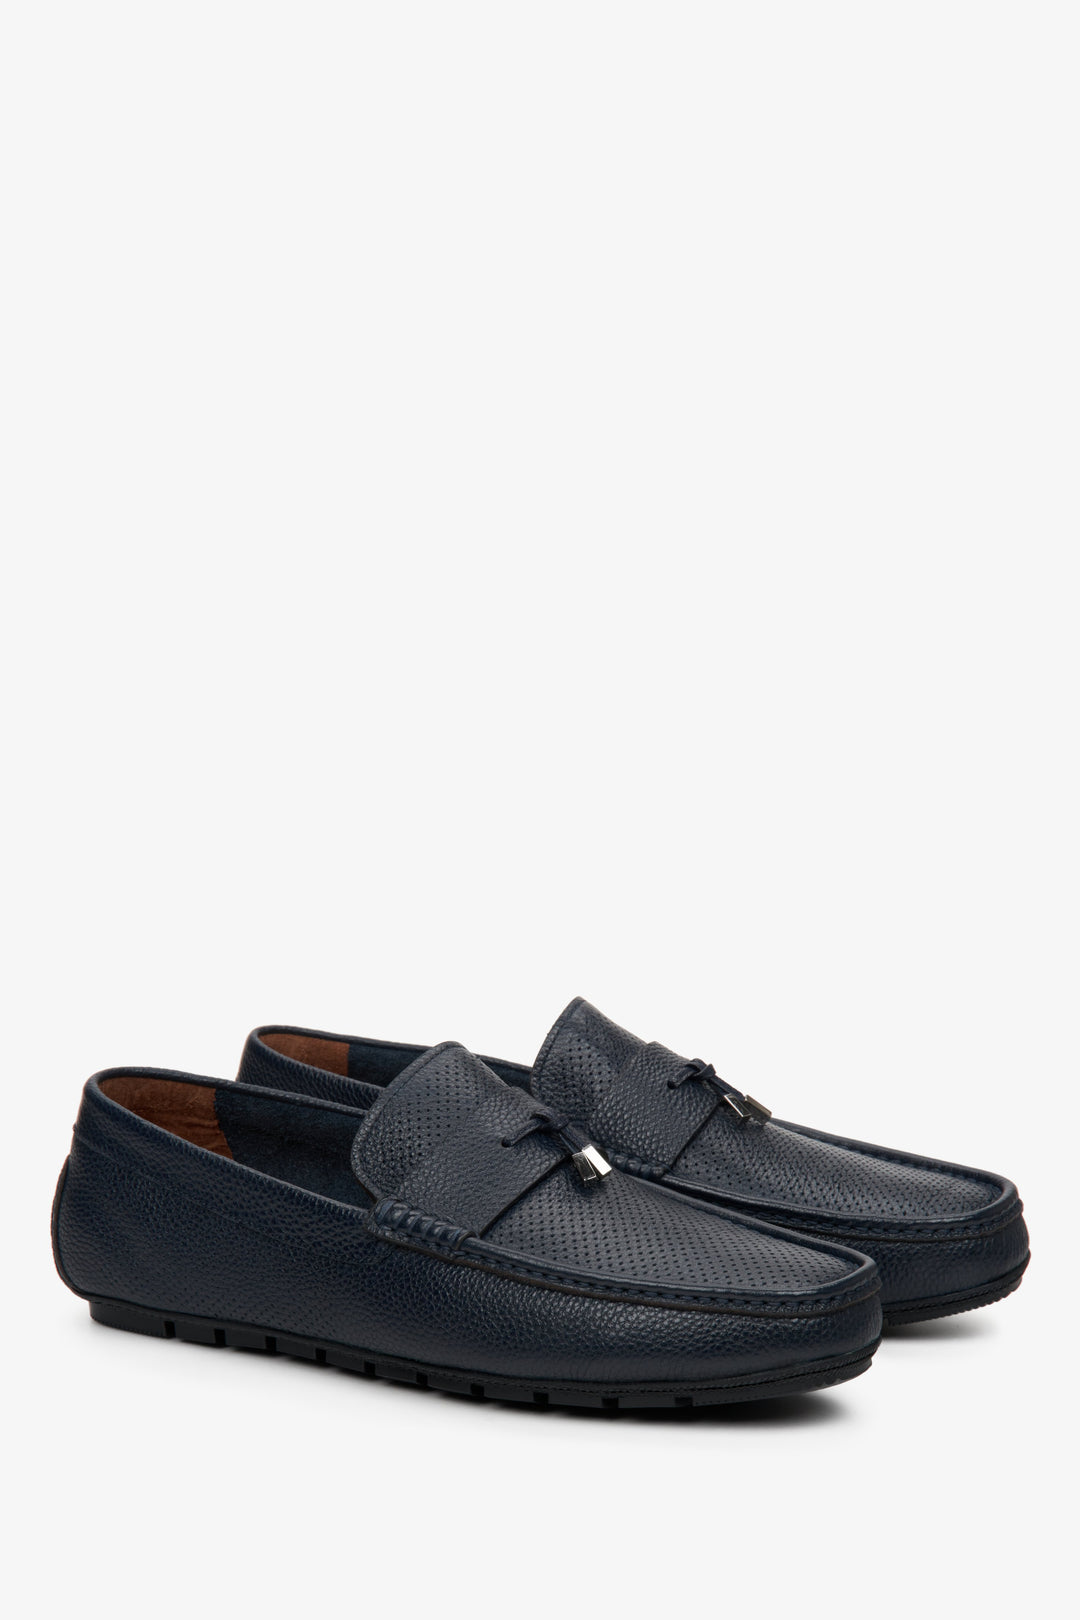 Estro men's navy blue leather loafers - presentation of the toe and side seam of the shoe.